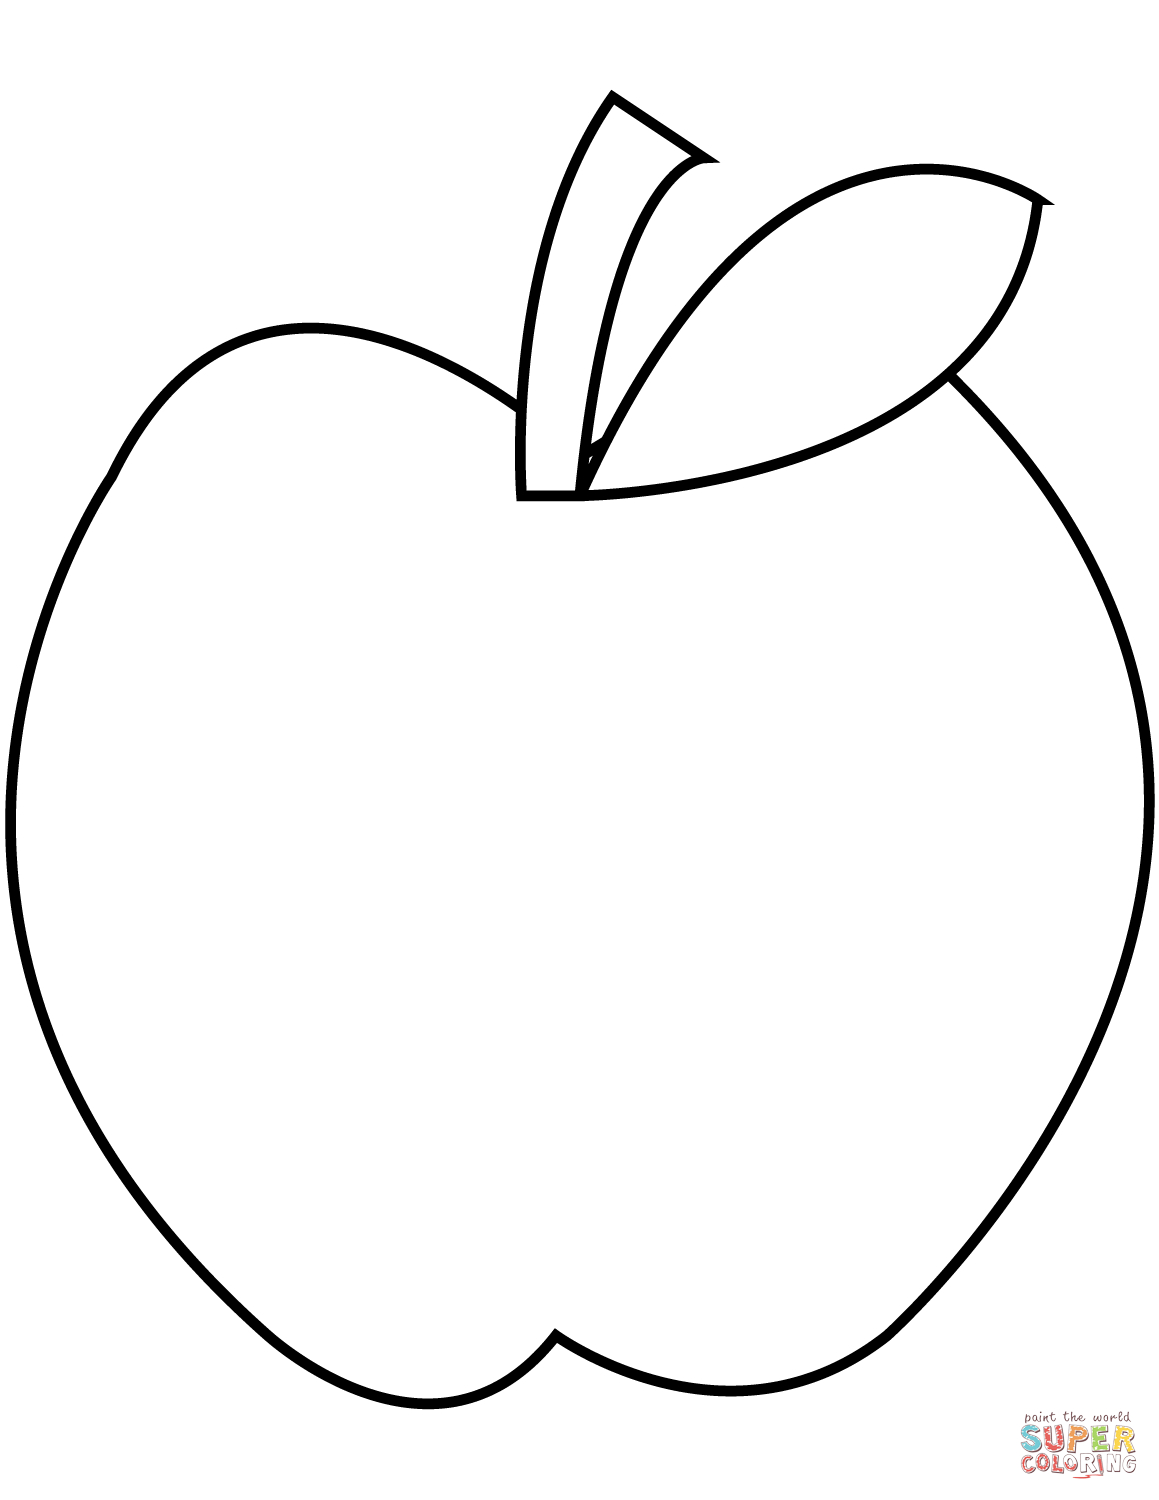 Printable Apple Coloring Pages Apples Coloring Pages Free Coloring Pages